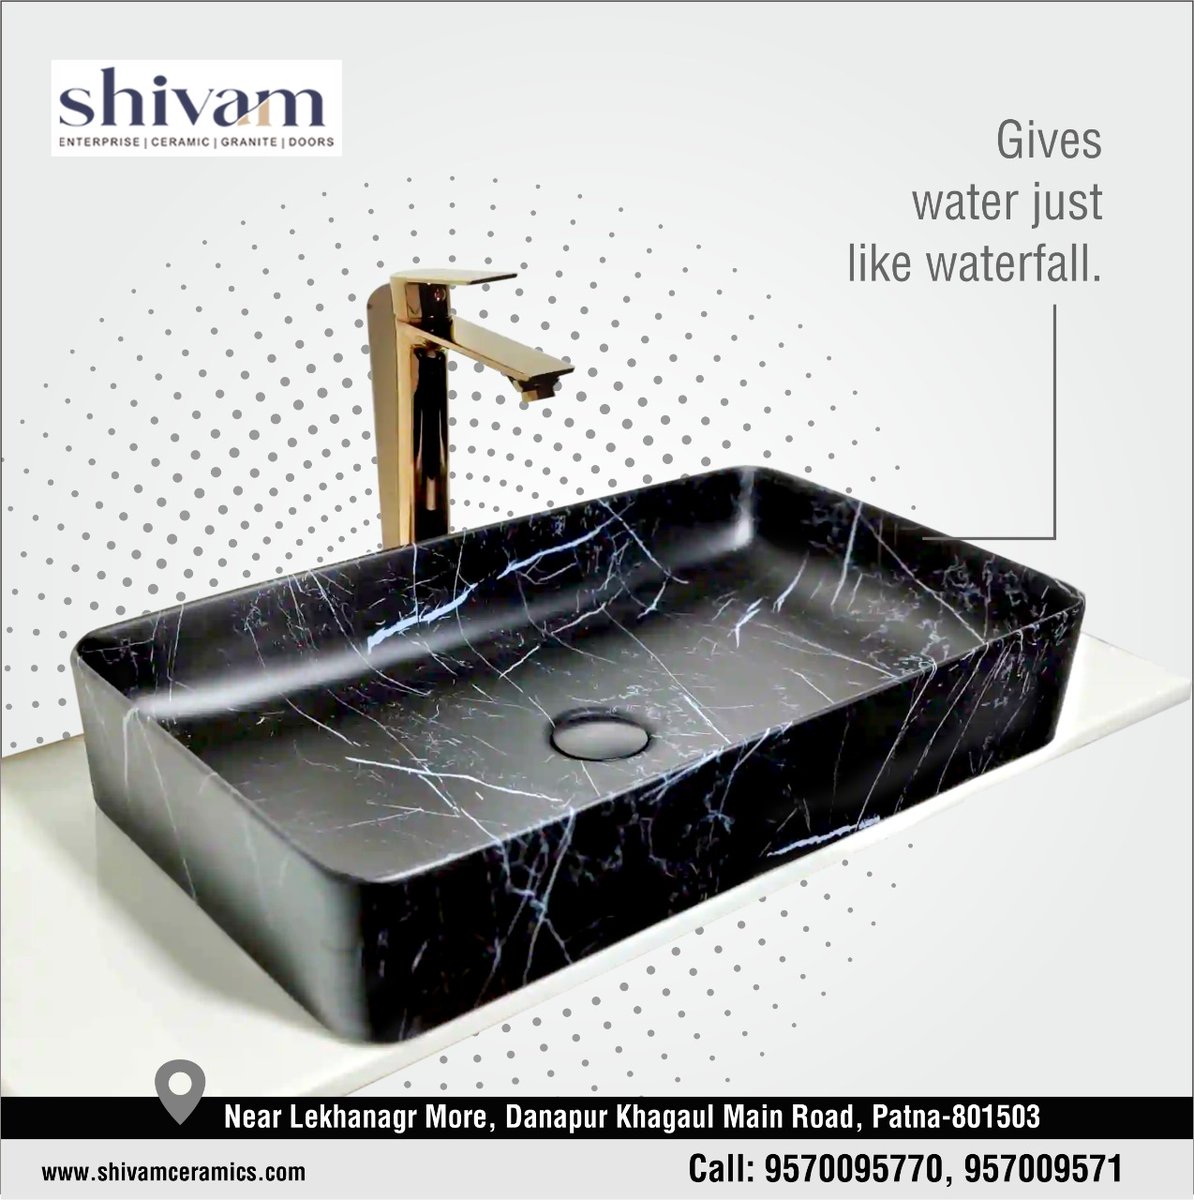 Now give your bathroom the all new fresh feel of the waterfall with our Shivam Ceramic all new bathroom products range with best in class quality range✌️
Shivam Ceramic✌️

#shivamgranites  #shivamdoors #ShivamTiles #ShivamBathware #ZameenSeJudey #LargestTileCollection